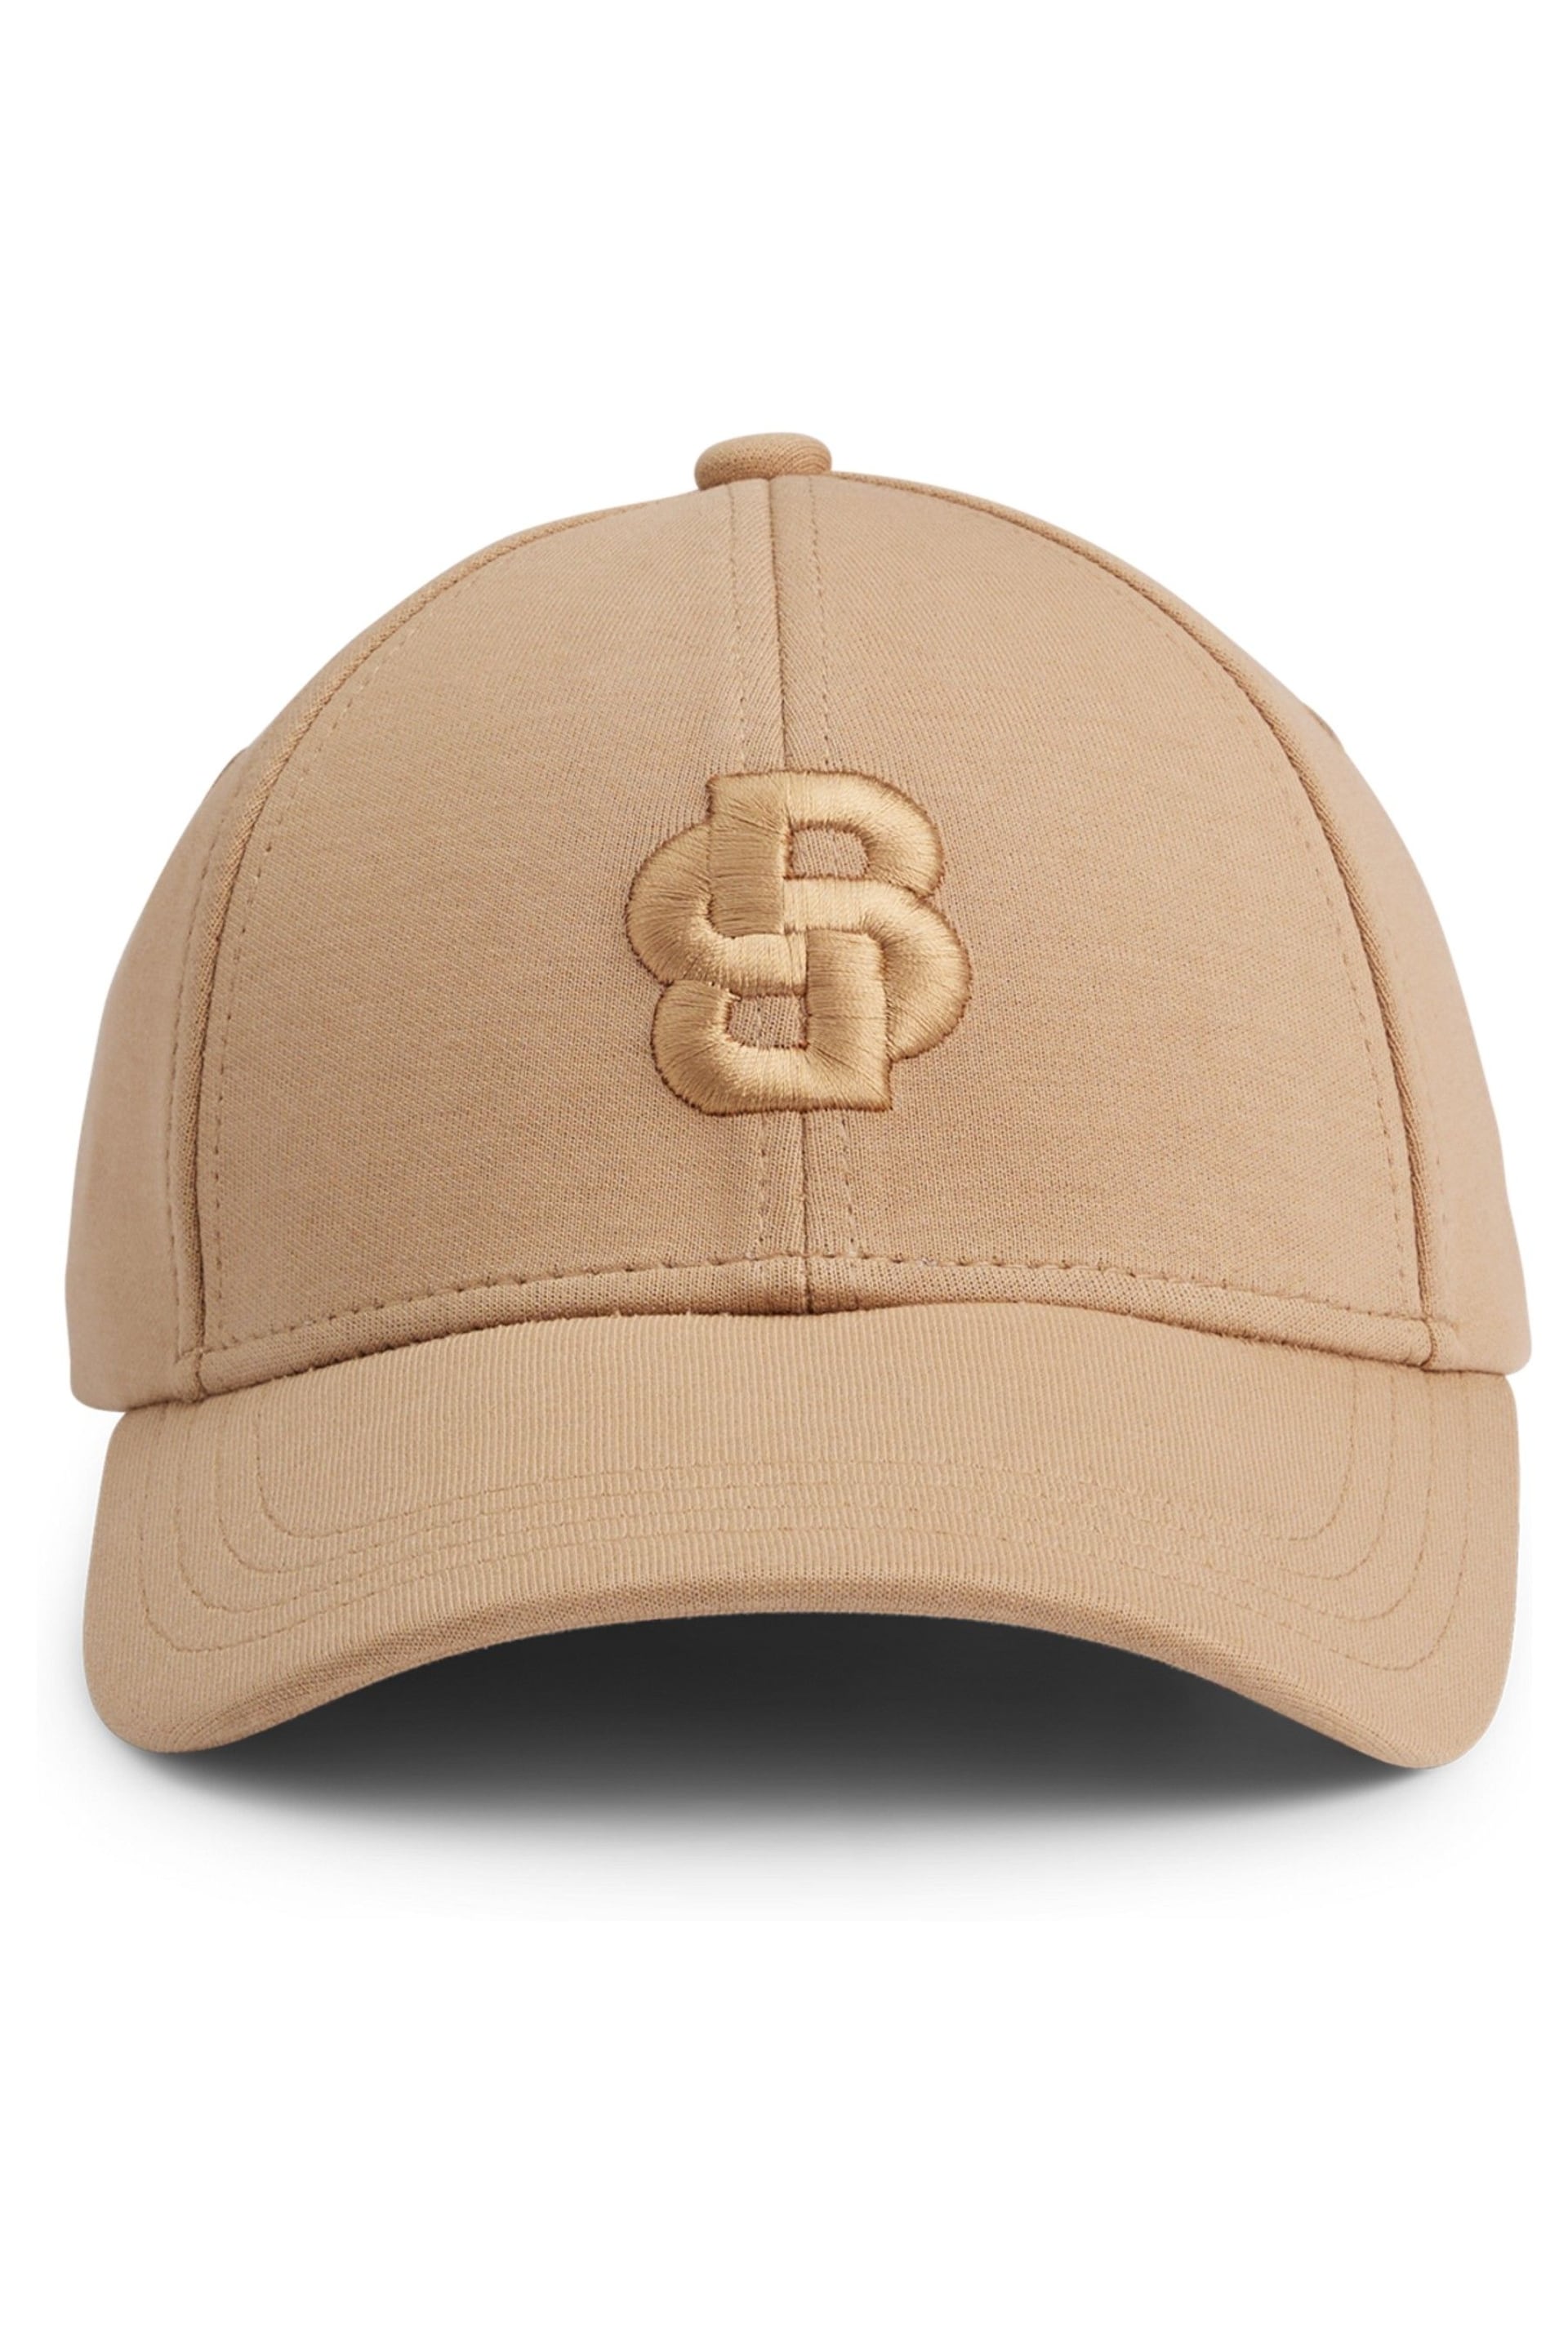 BOSS Natural Embroided Double Monogram Logo Cap - Image 3 of 5